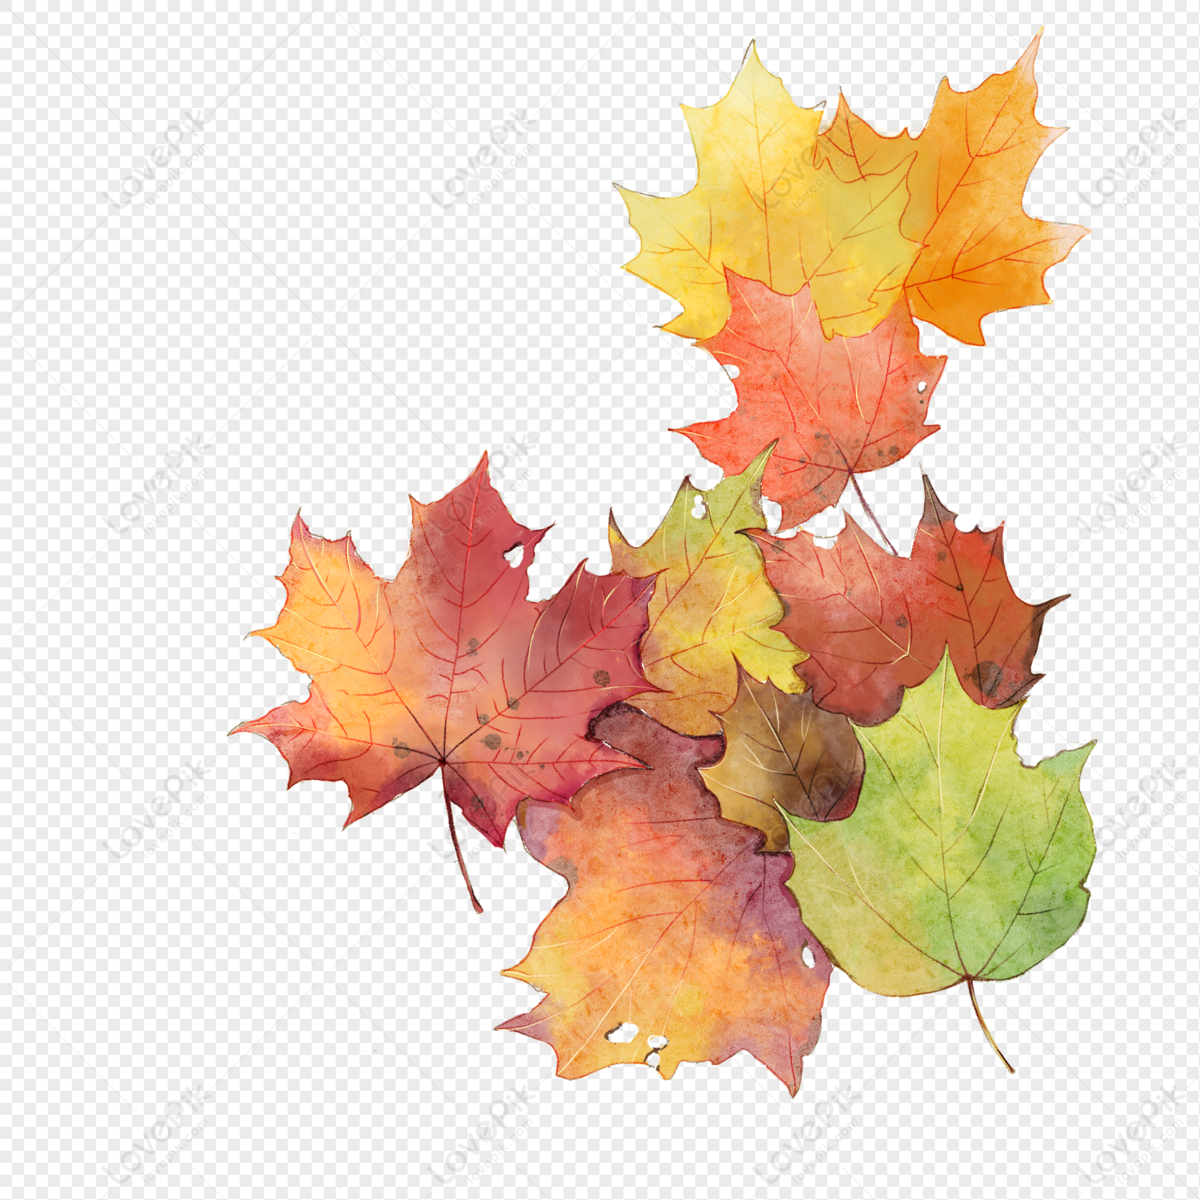 Red Maple Leaf Cell Phone Wallpaper Images Free Download on Lovepik